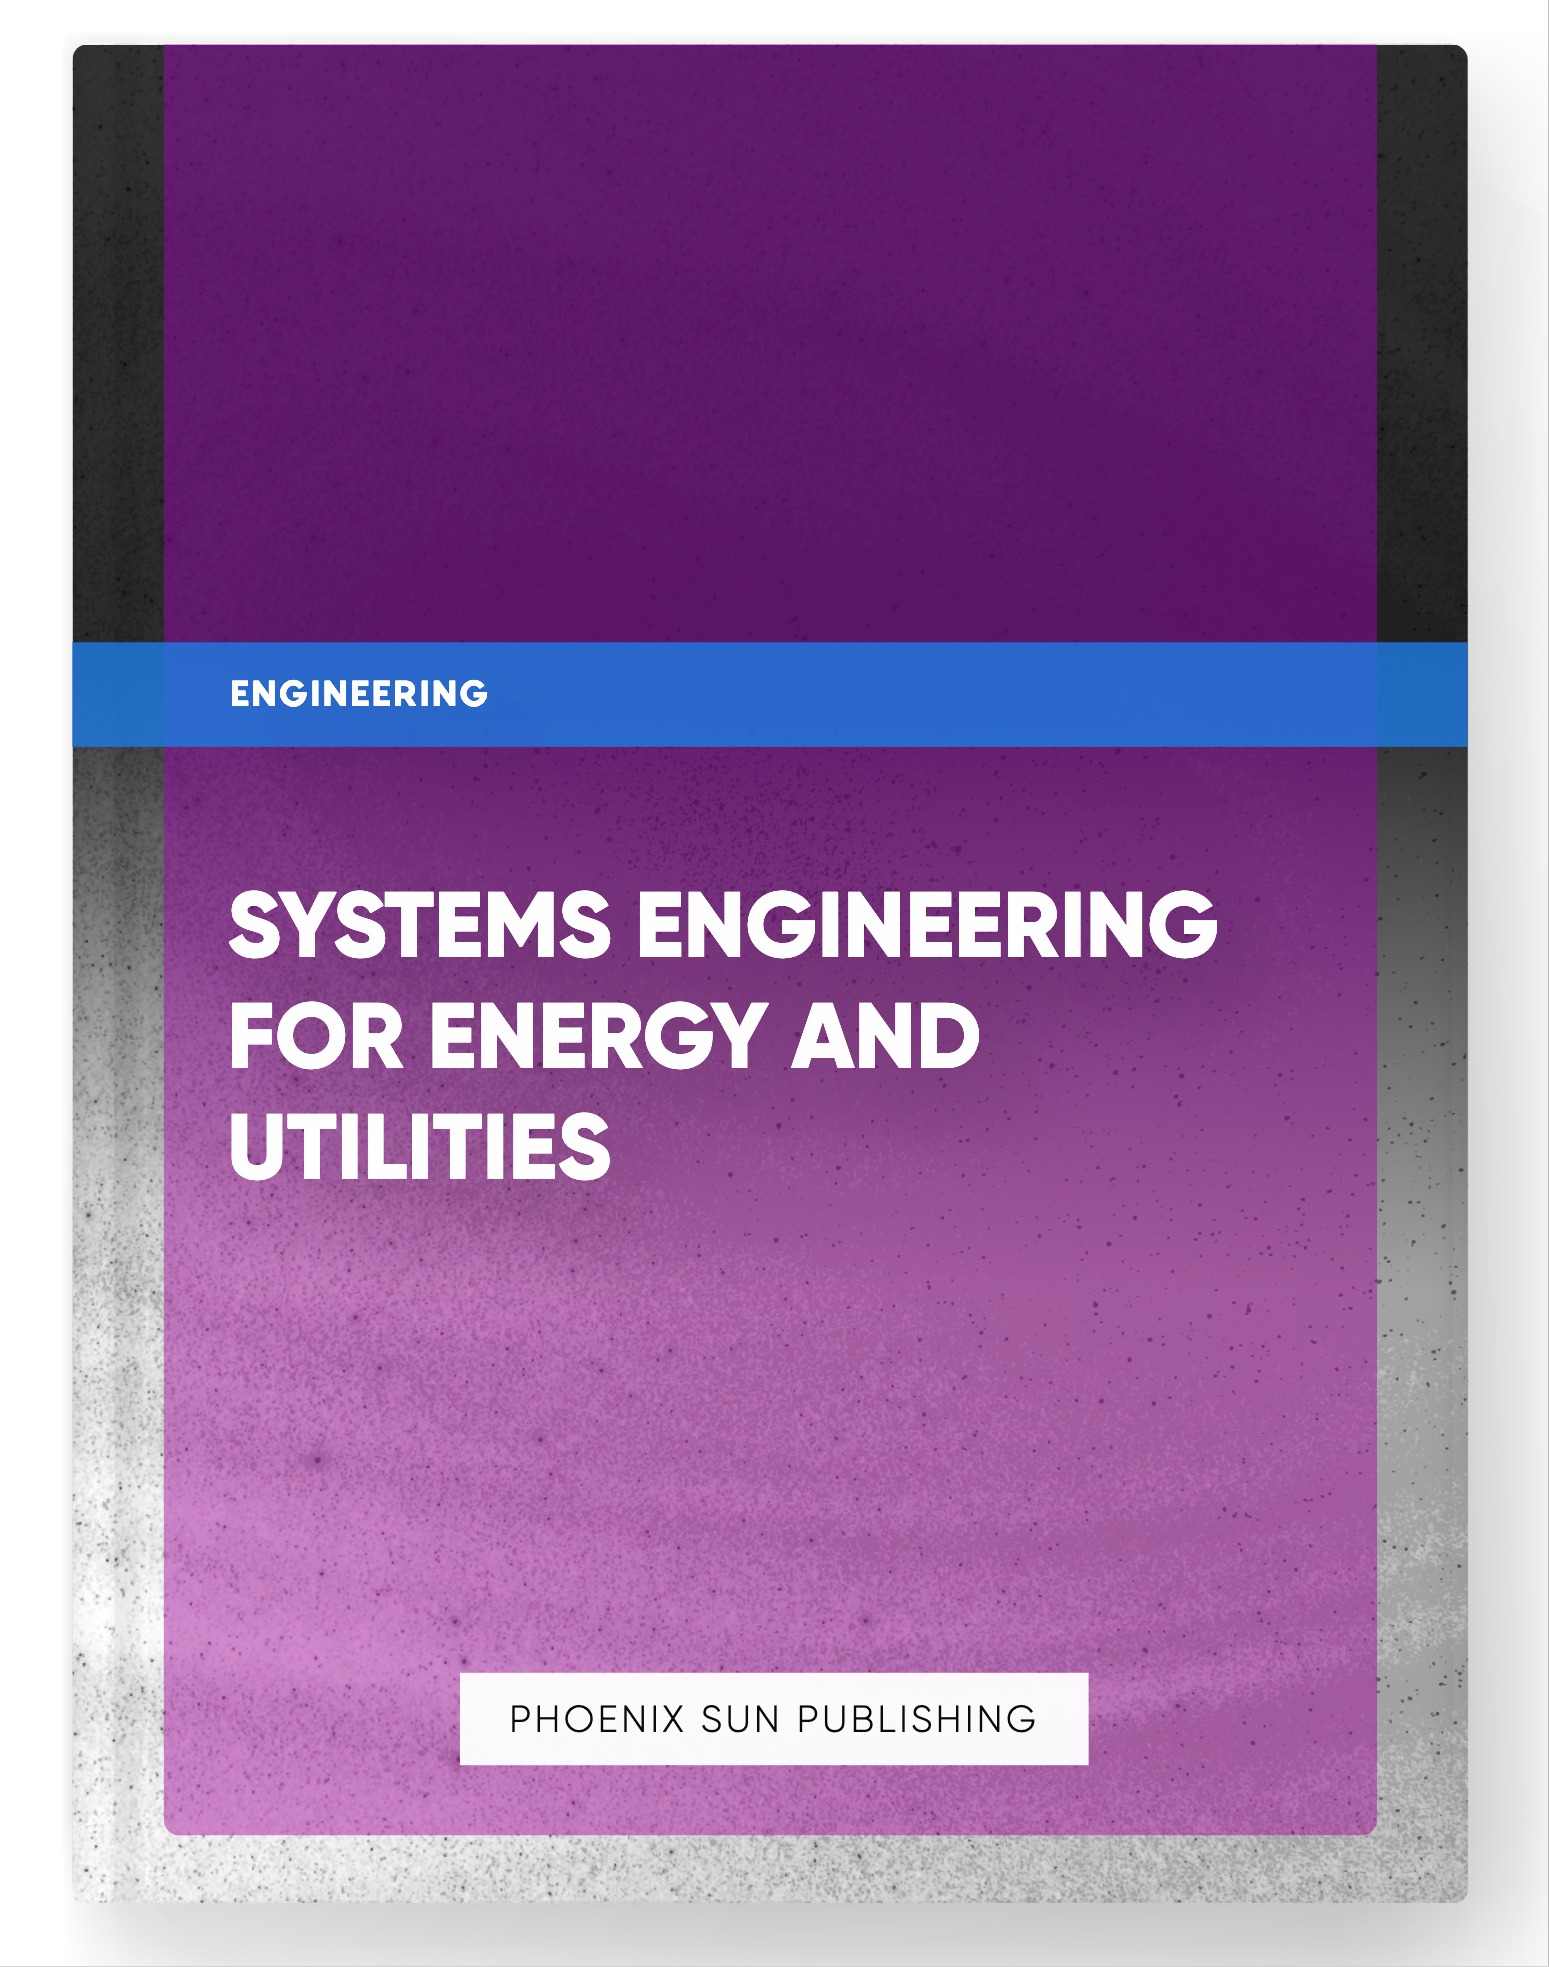 Systems Engineering for Energy and Utilities